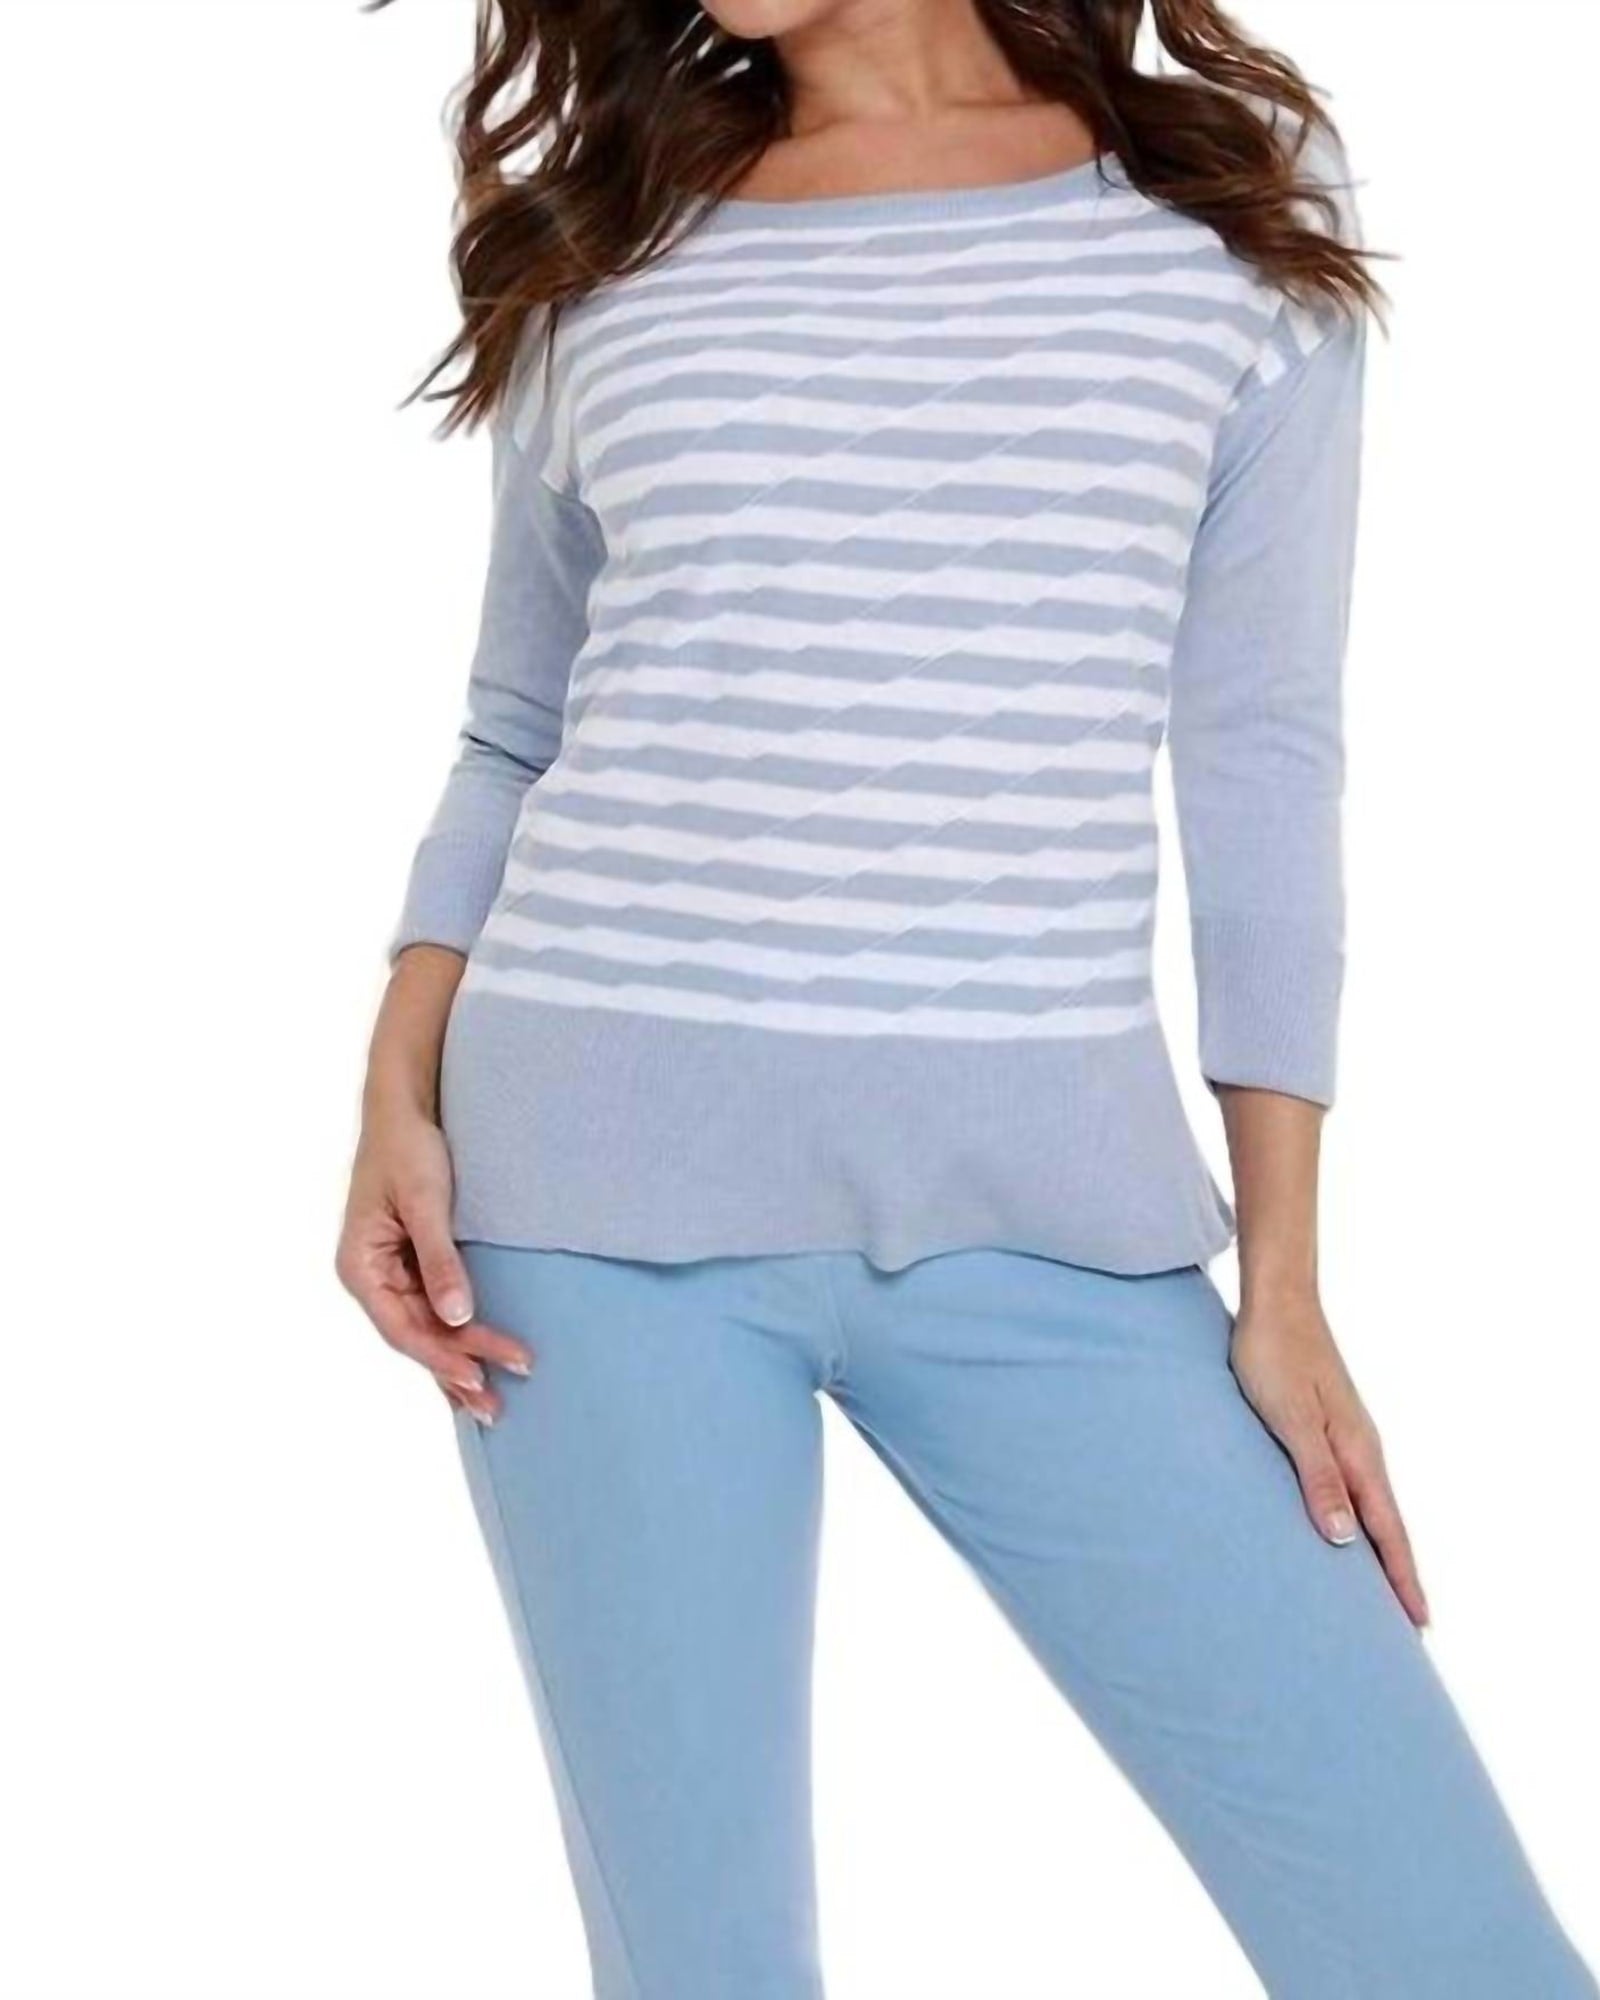 Double Striped Sweater in Sky Blue/White | Sky Blue/White